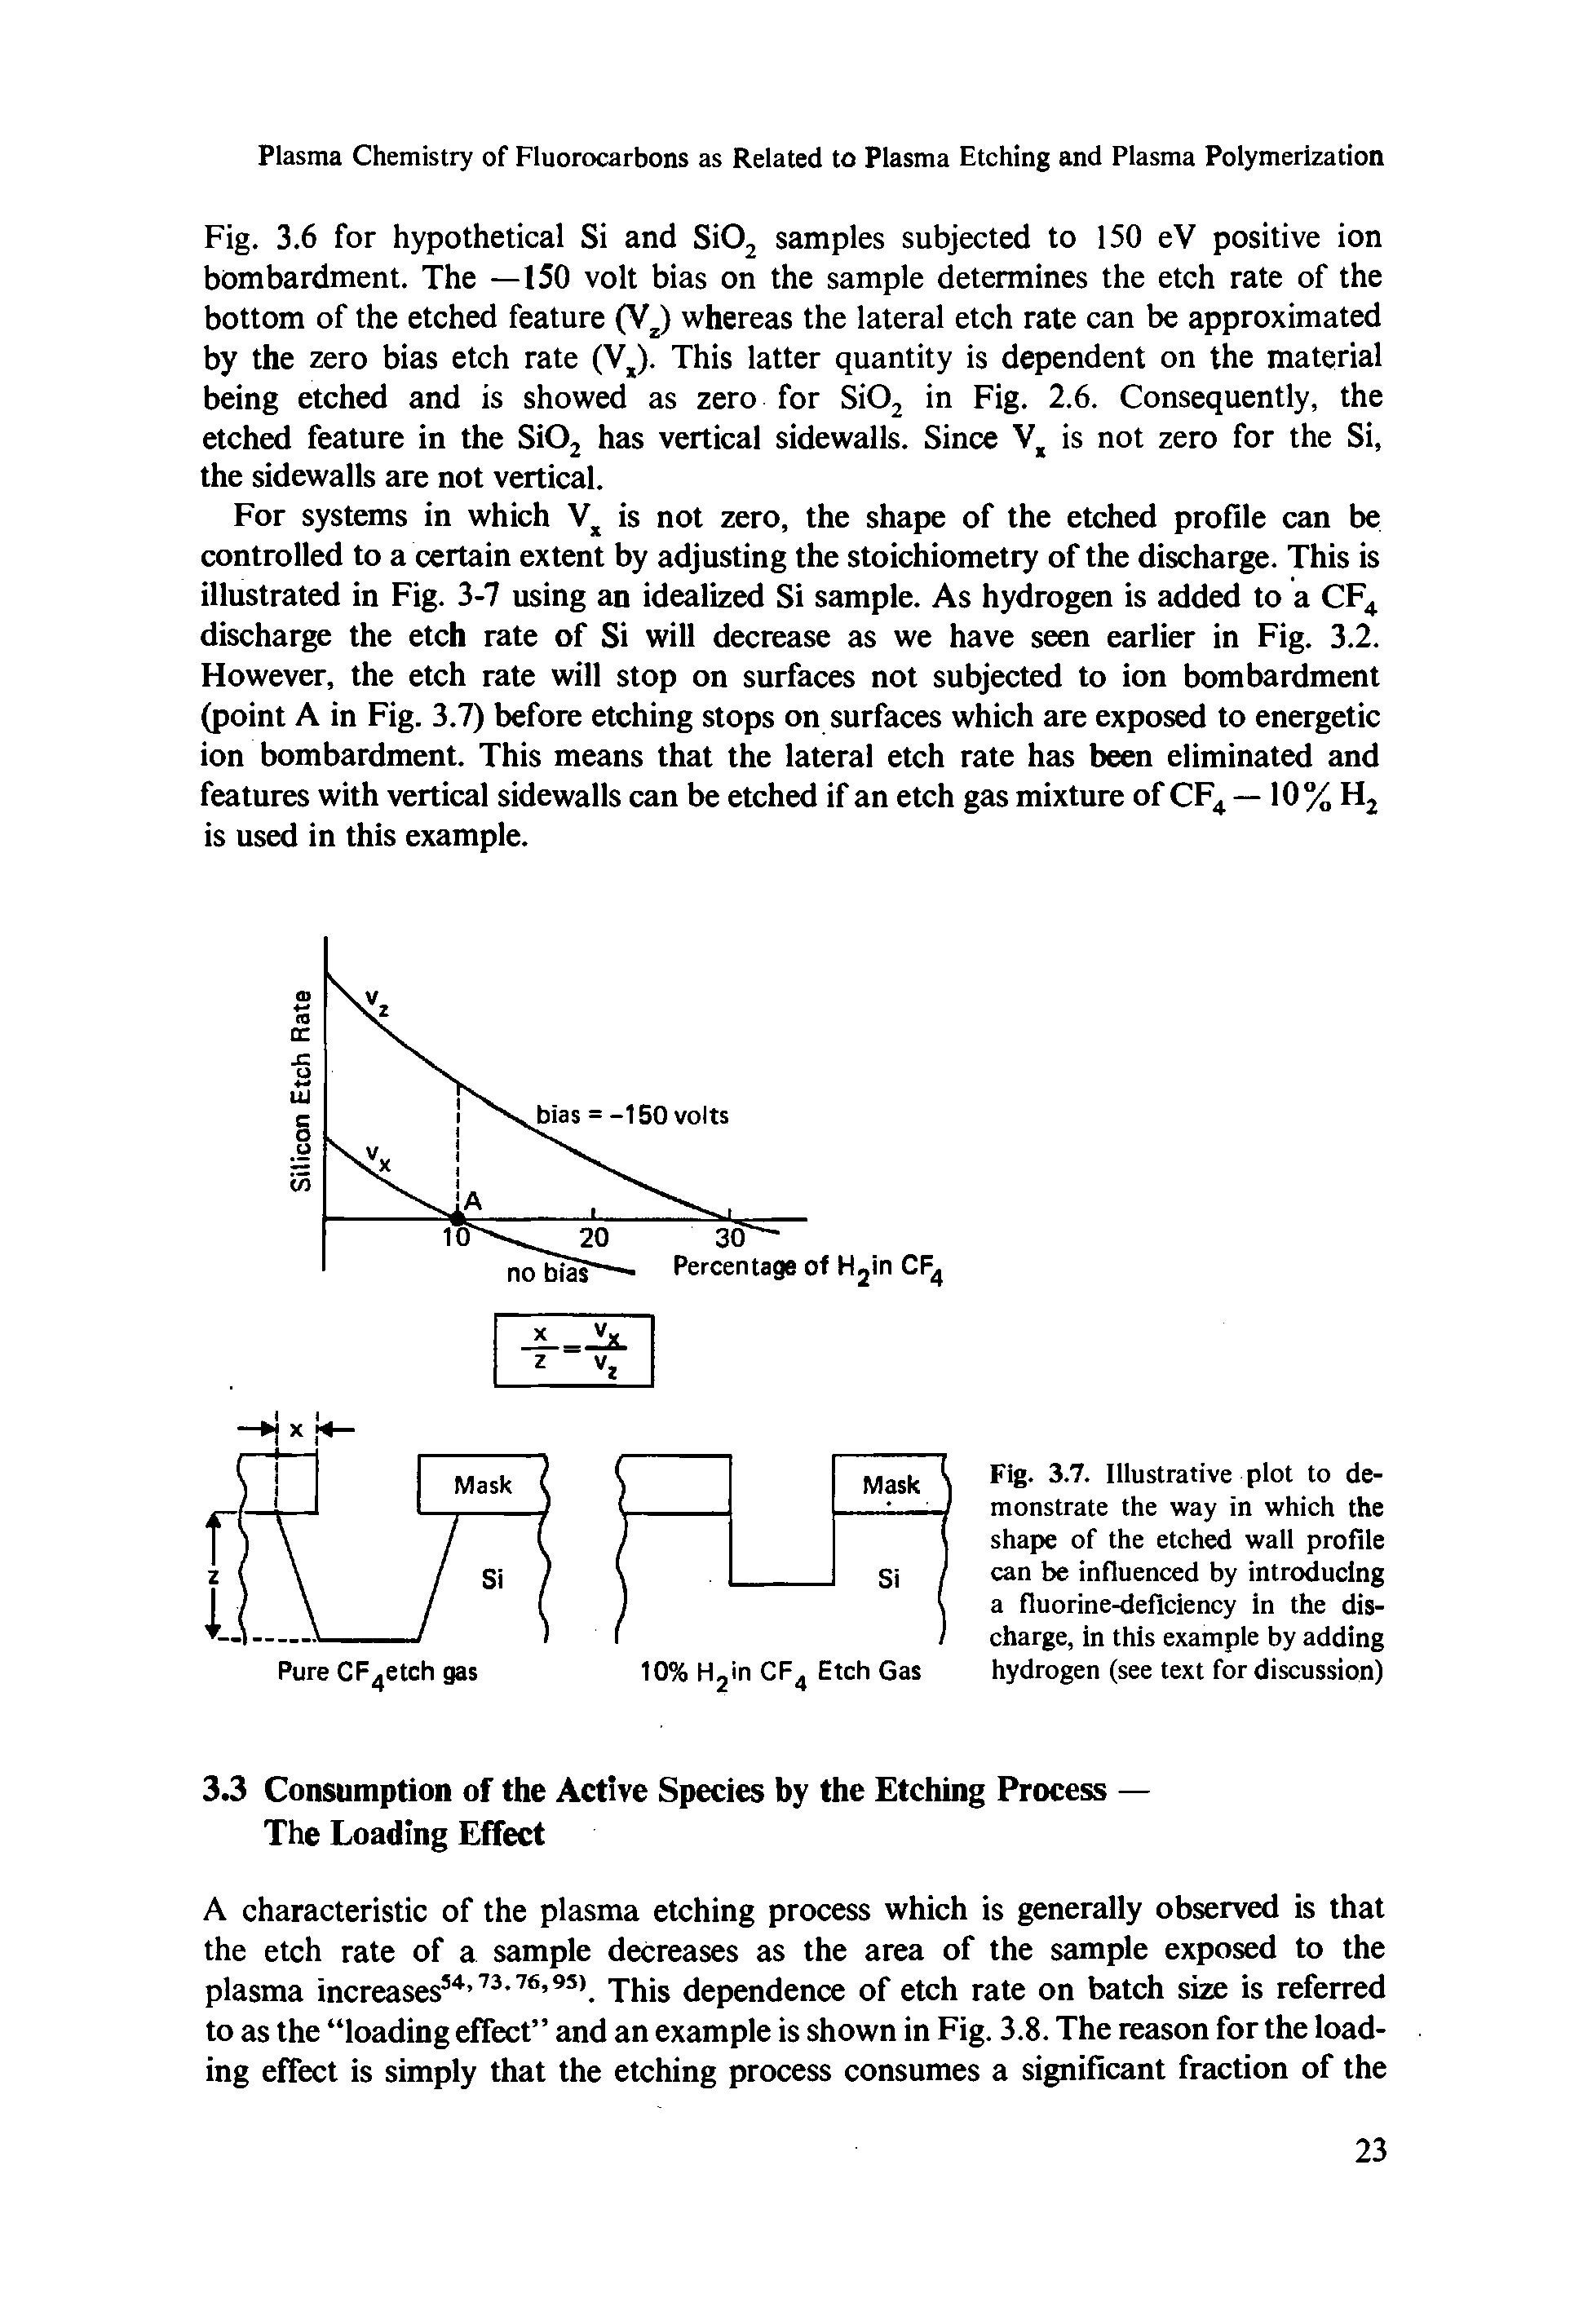 Fig. 3.6 for hypothetical Si and SiO samples subjected to 150 eV positive ion bombardment. The —150 volt bias on the sample determines the etch rate of the bottom of the etched feature (V ) whereas the lateral etch rate can be approximated by the zero bias etch rate (V,). This latter quantity is dependent on the material being etched and is showed as zero for Si02 in Fig. 2.6. Consequently, the etched feature in the SiOj has vertical sidewalls. Since is not zero for the Si, the sidewalls are not vertical.